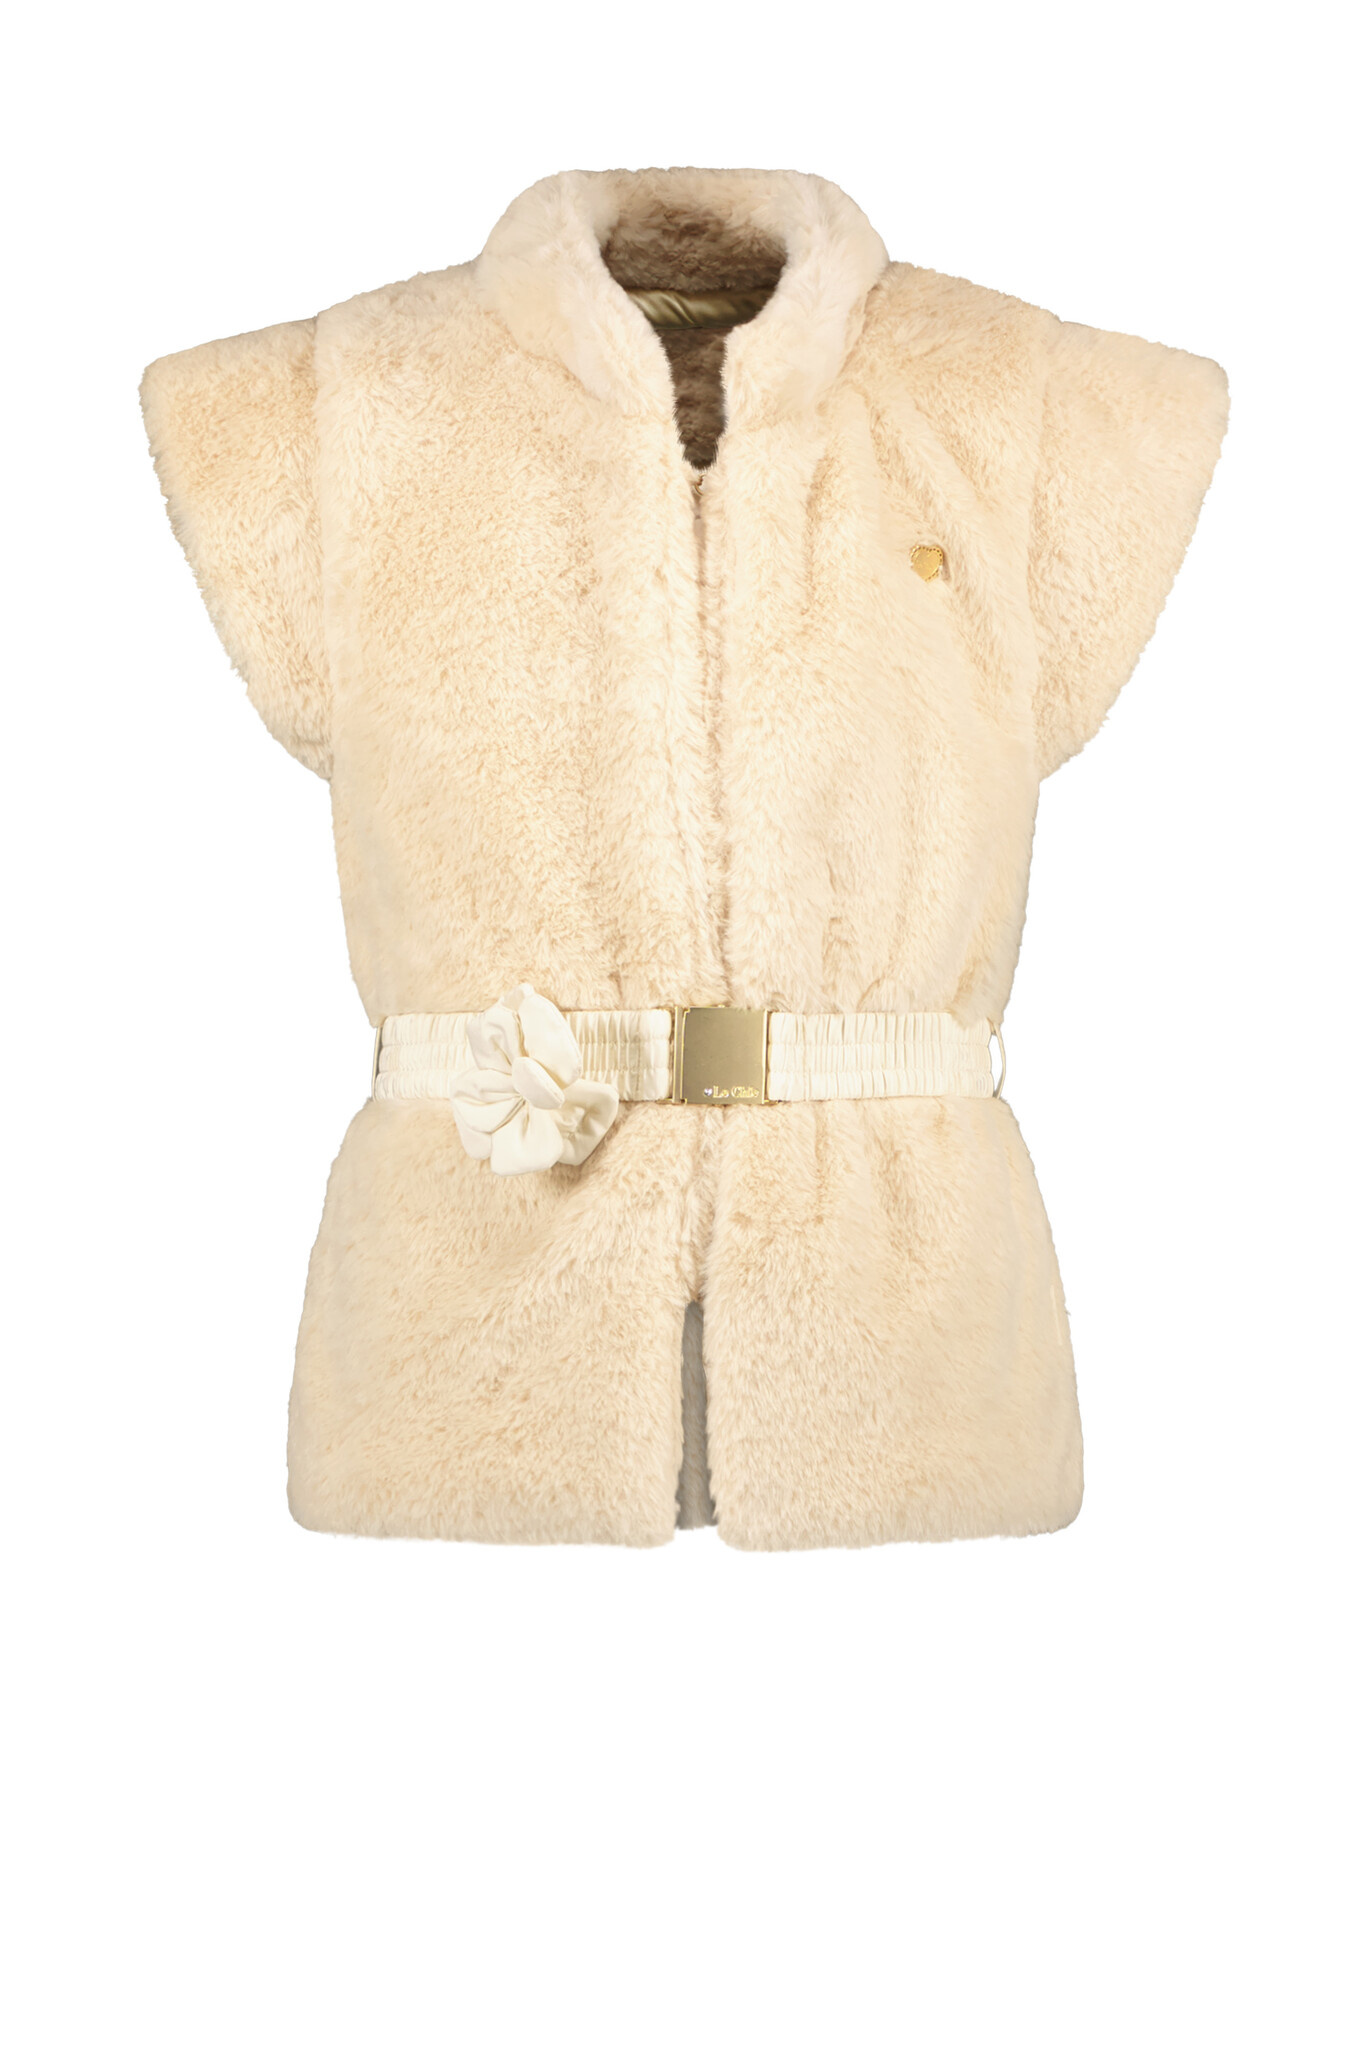 Le Chic C308-5105 Meisjes Gilet - Pearled Ivory - Maat 152